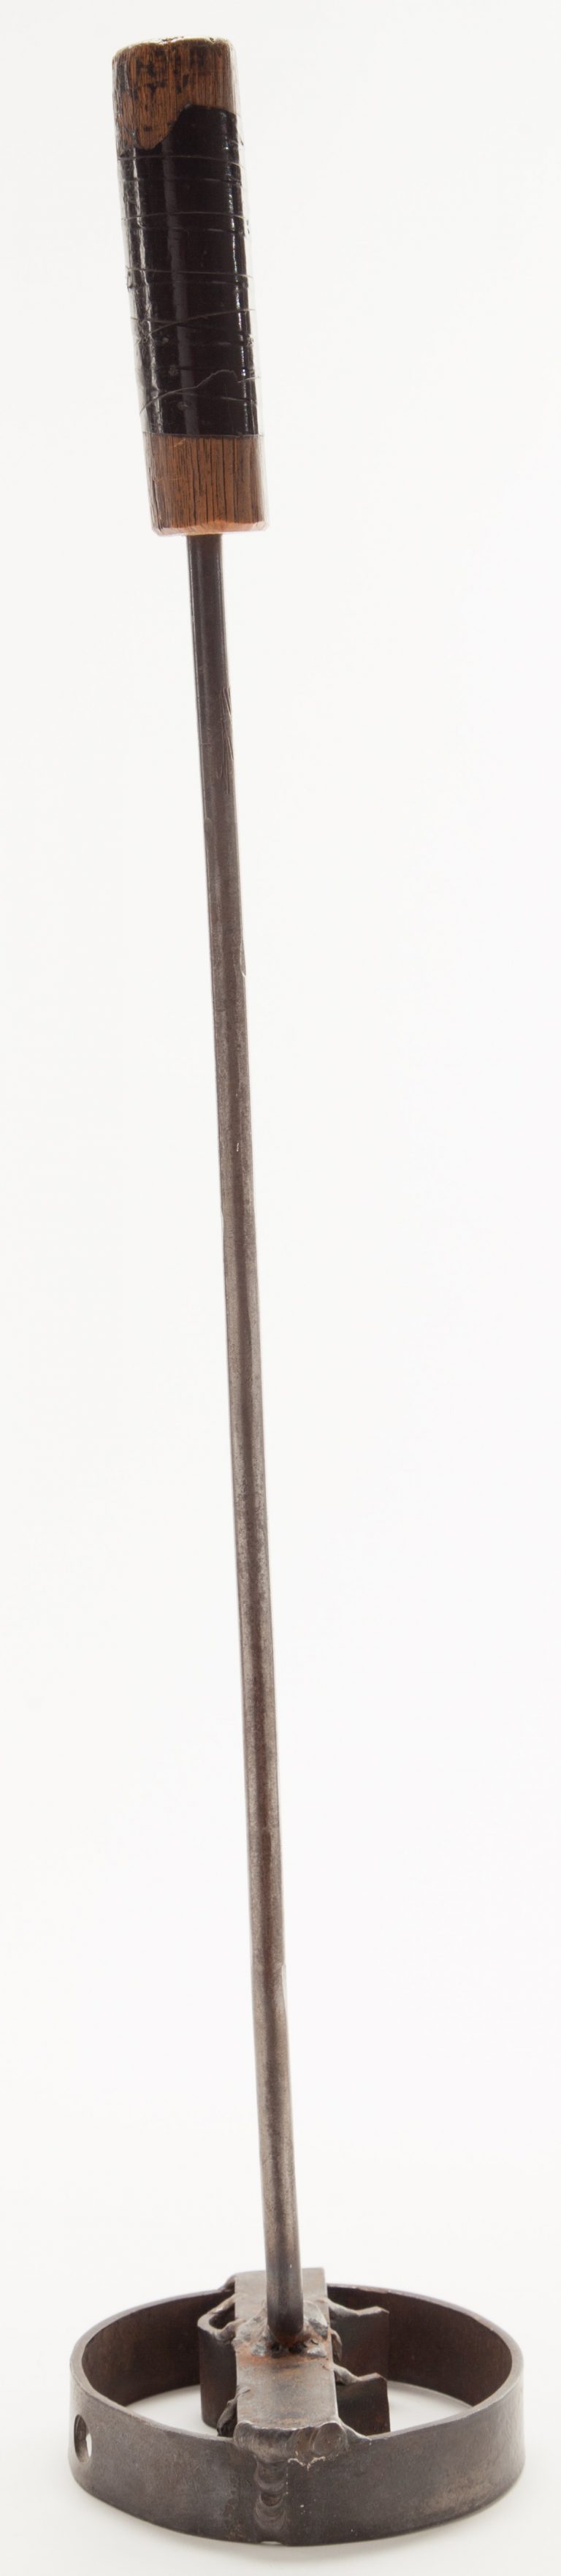 Side view of the branding iron with HP logo.